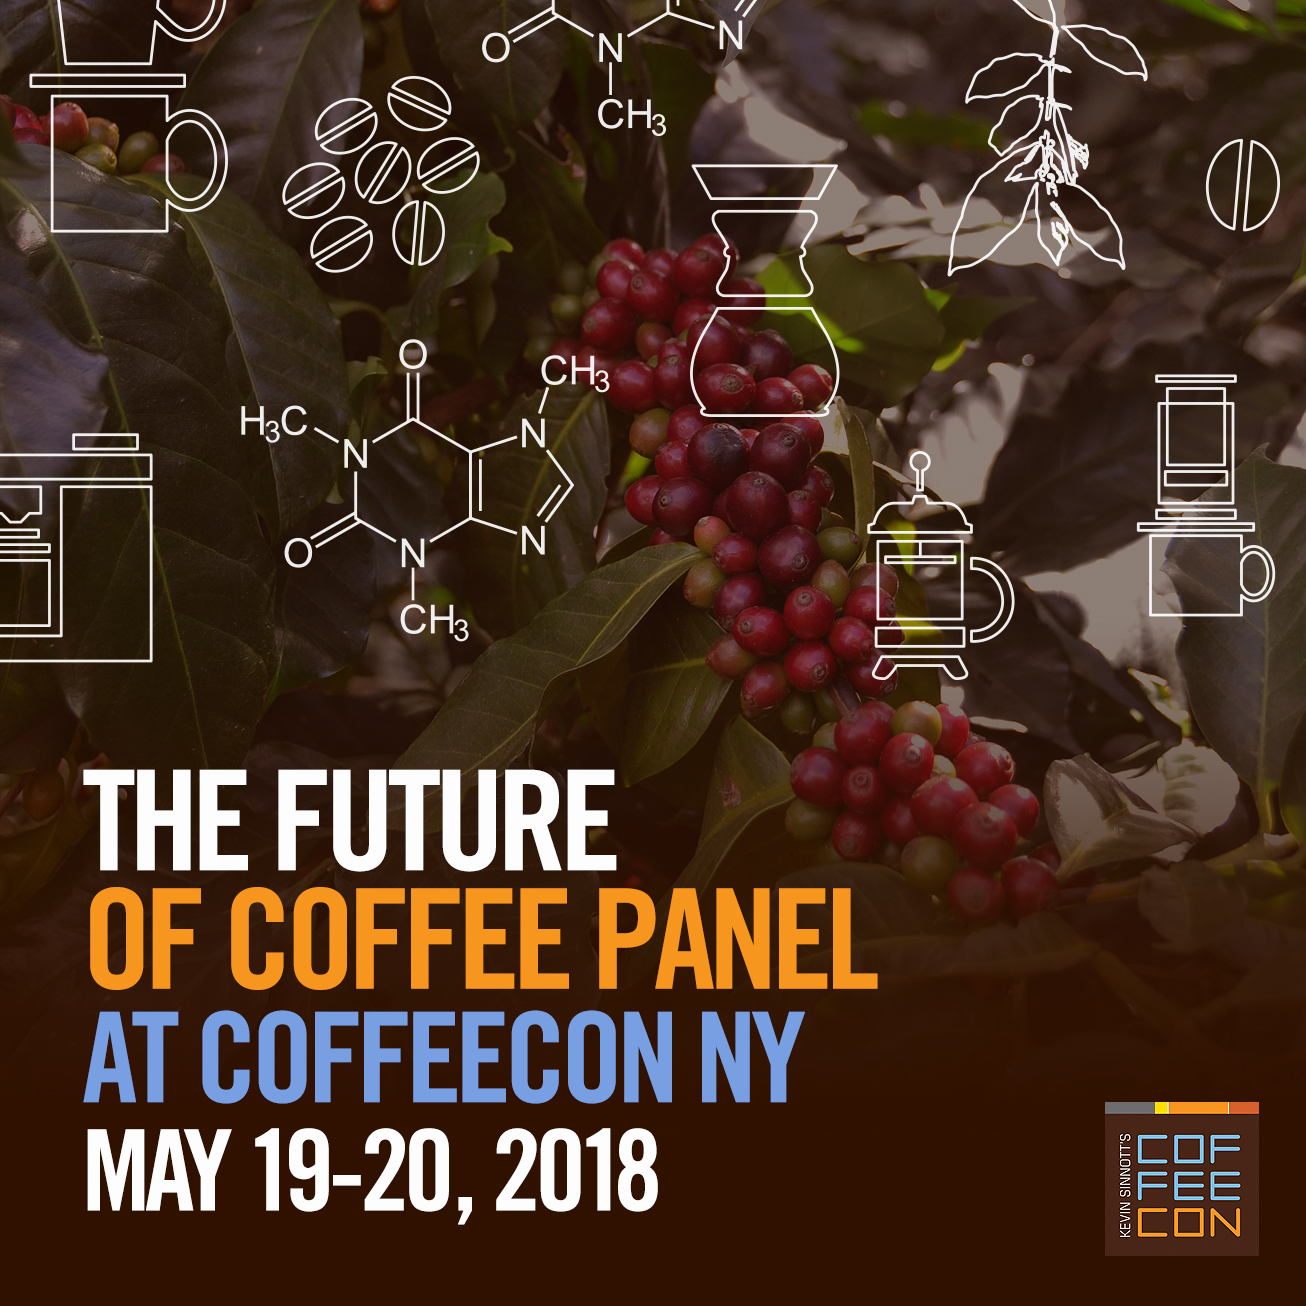 The Future of Coffee Panel